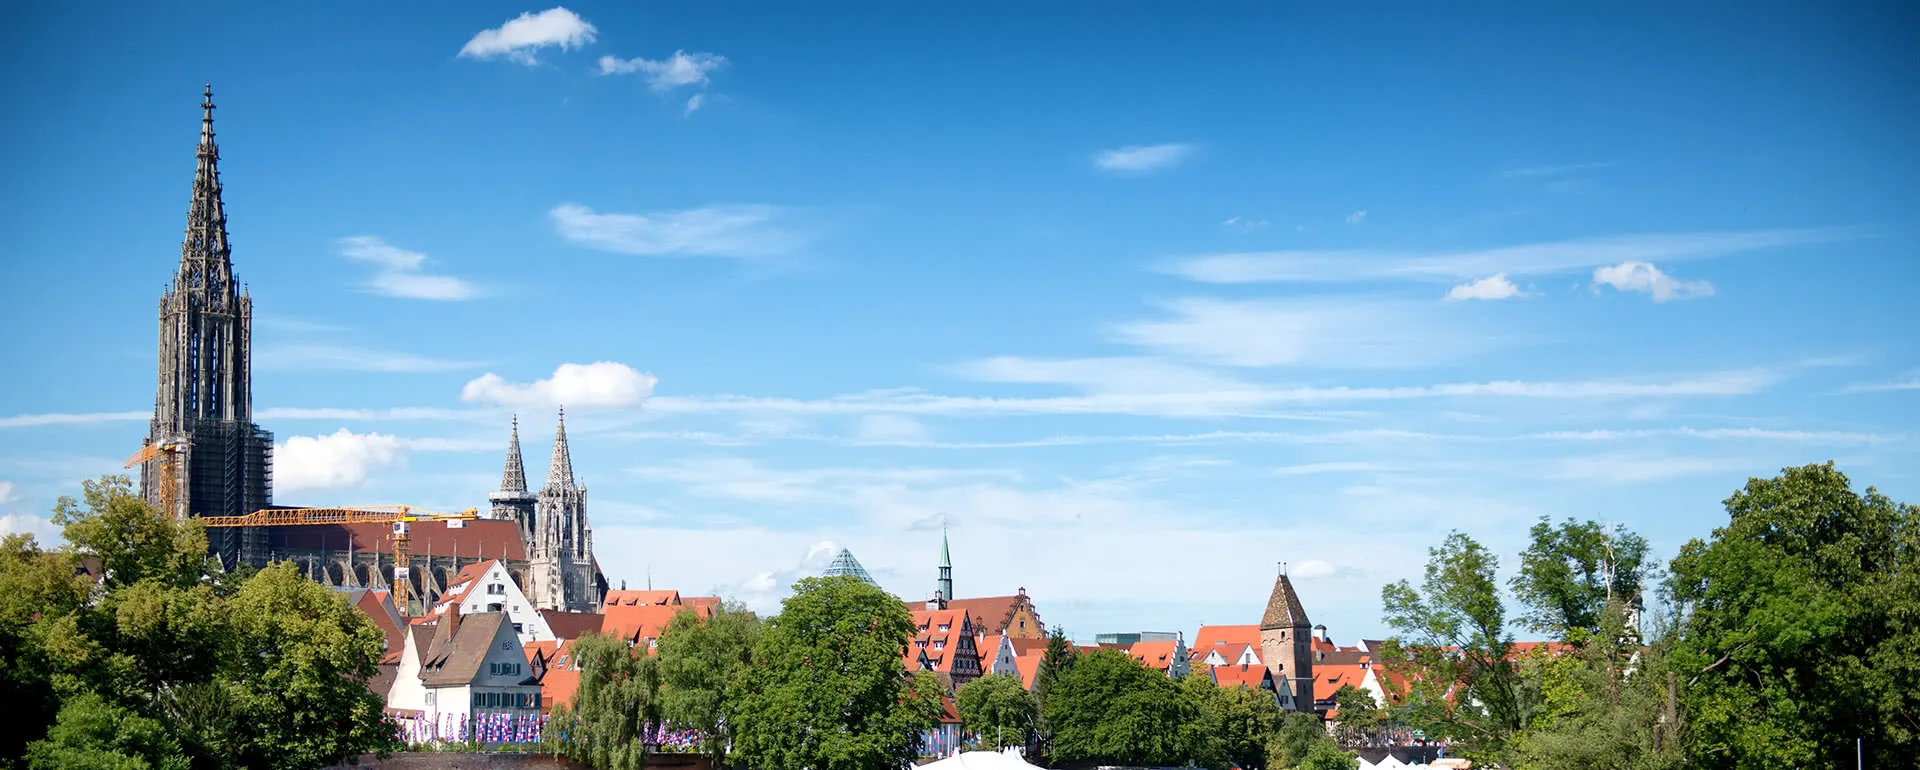 Ulm - the destination with youth hostels